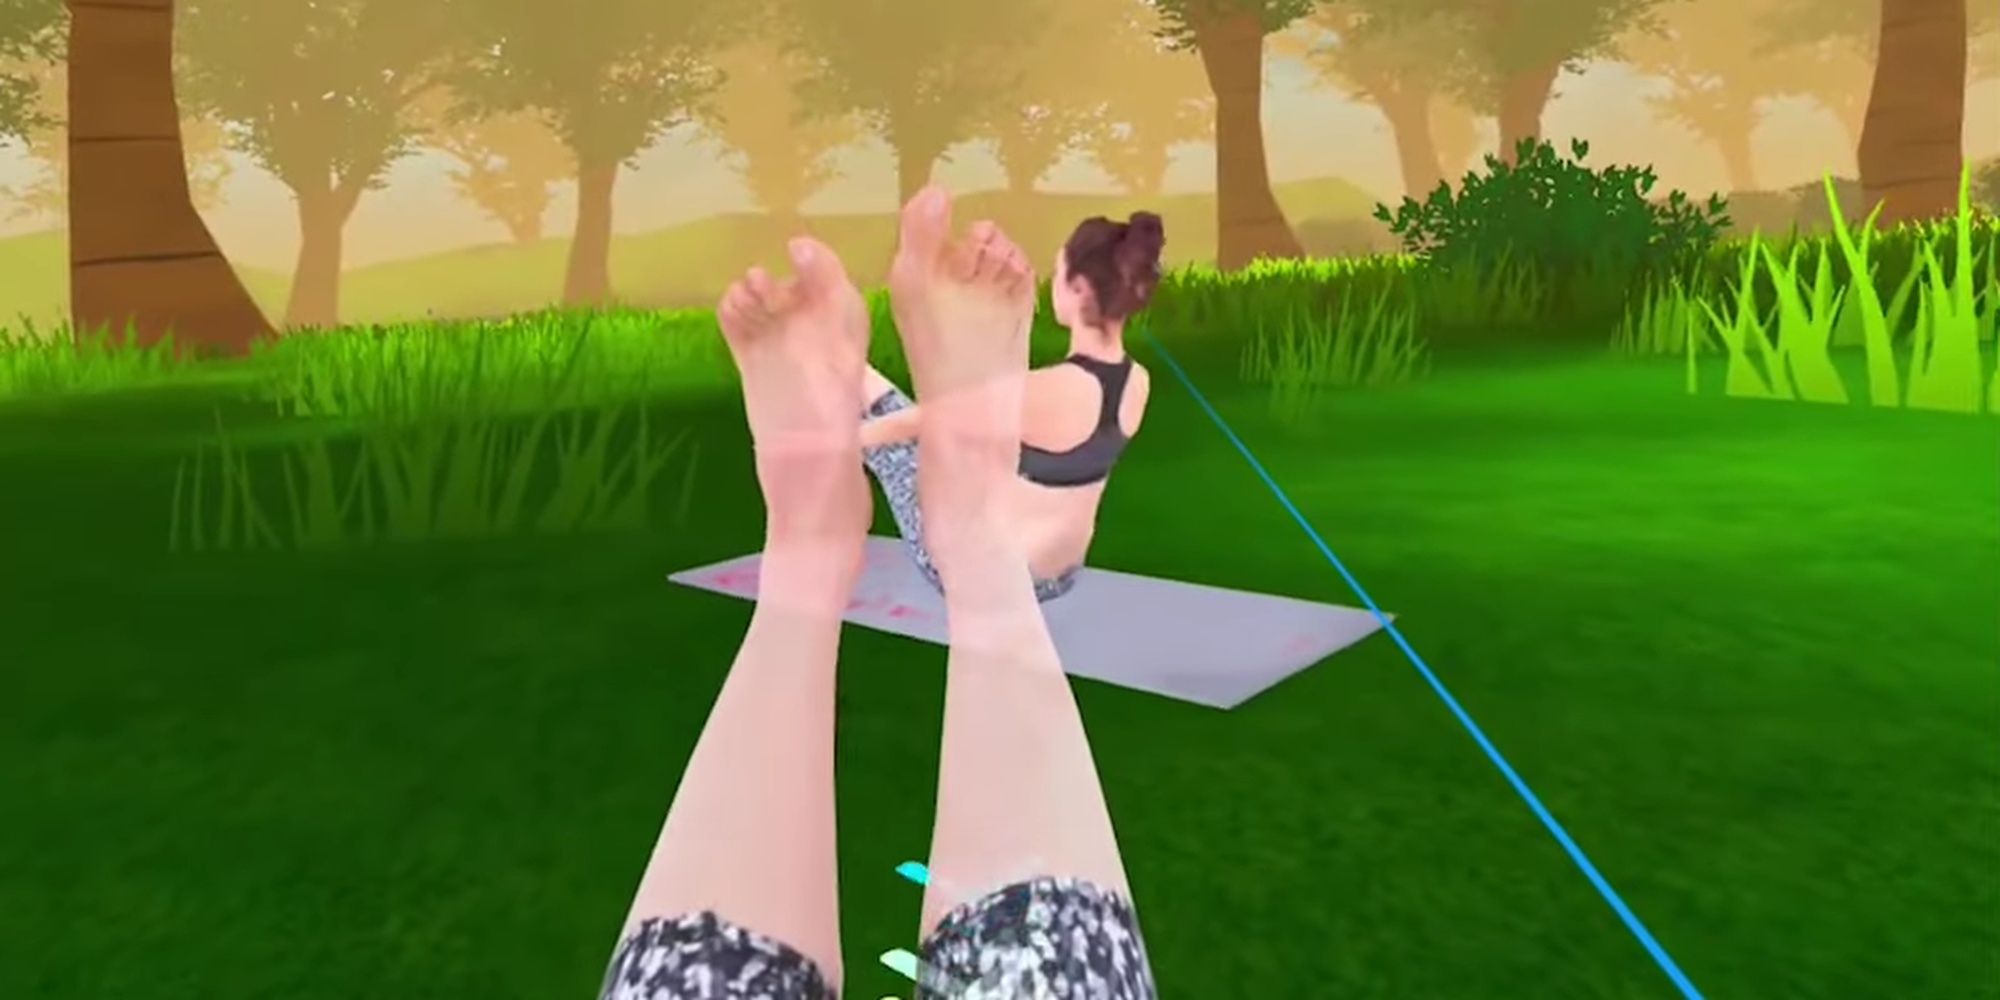 Yoga VR: Copying The Poses Of The Digital Instructor